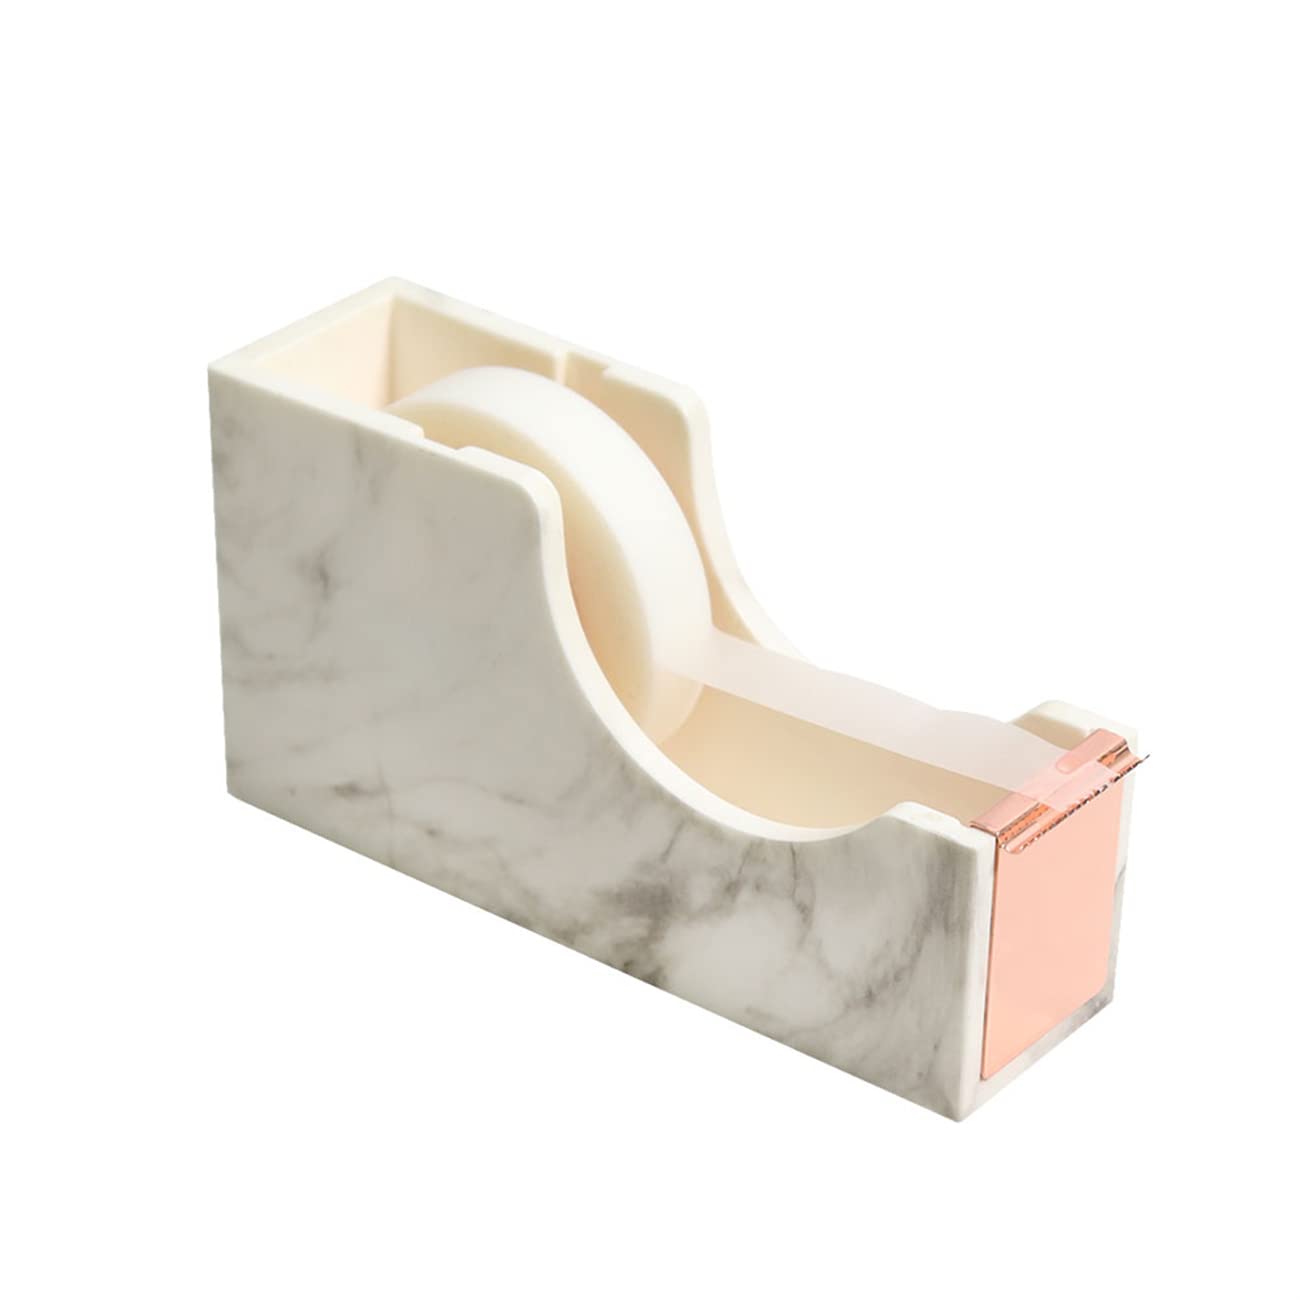 Book Cover MultiBey Desktop Tape Dispenser Gold Rose Gold Metal Core Marble White Texture Office Supplies 1